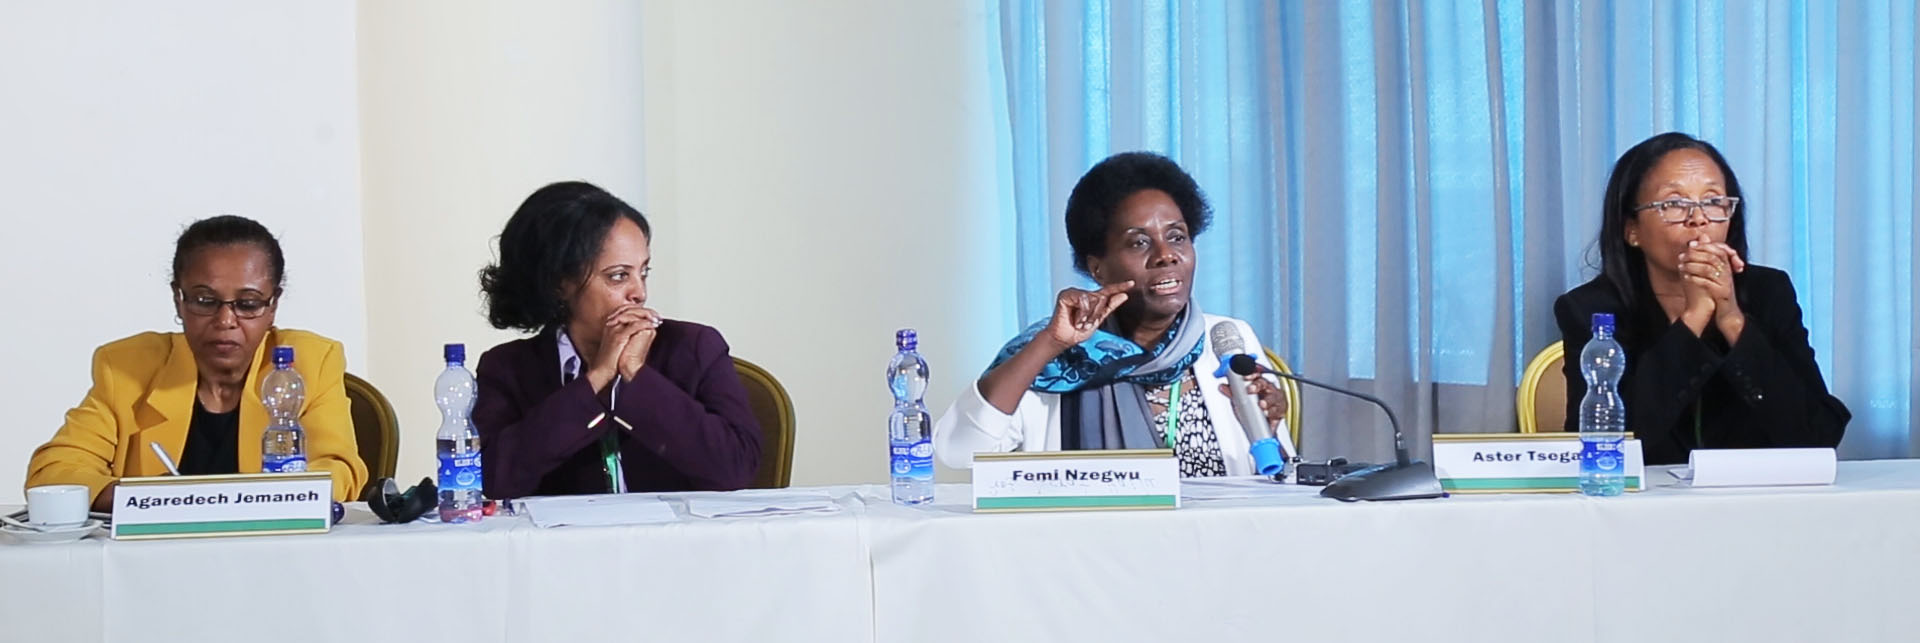 Gender discussions during Ethiopia dialogue event.